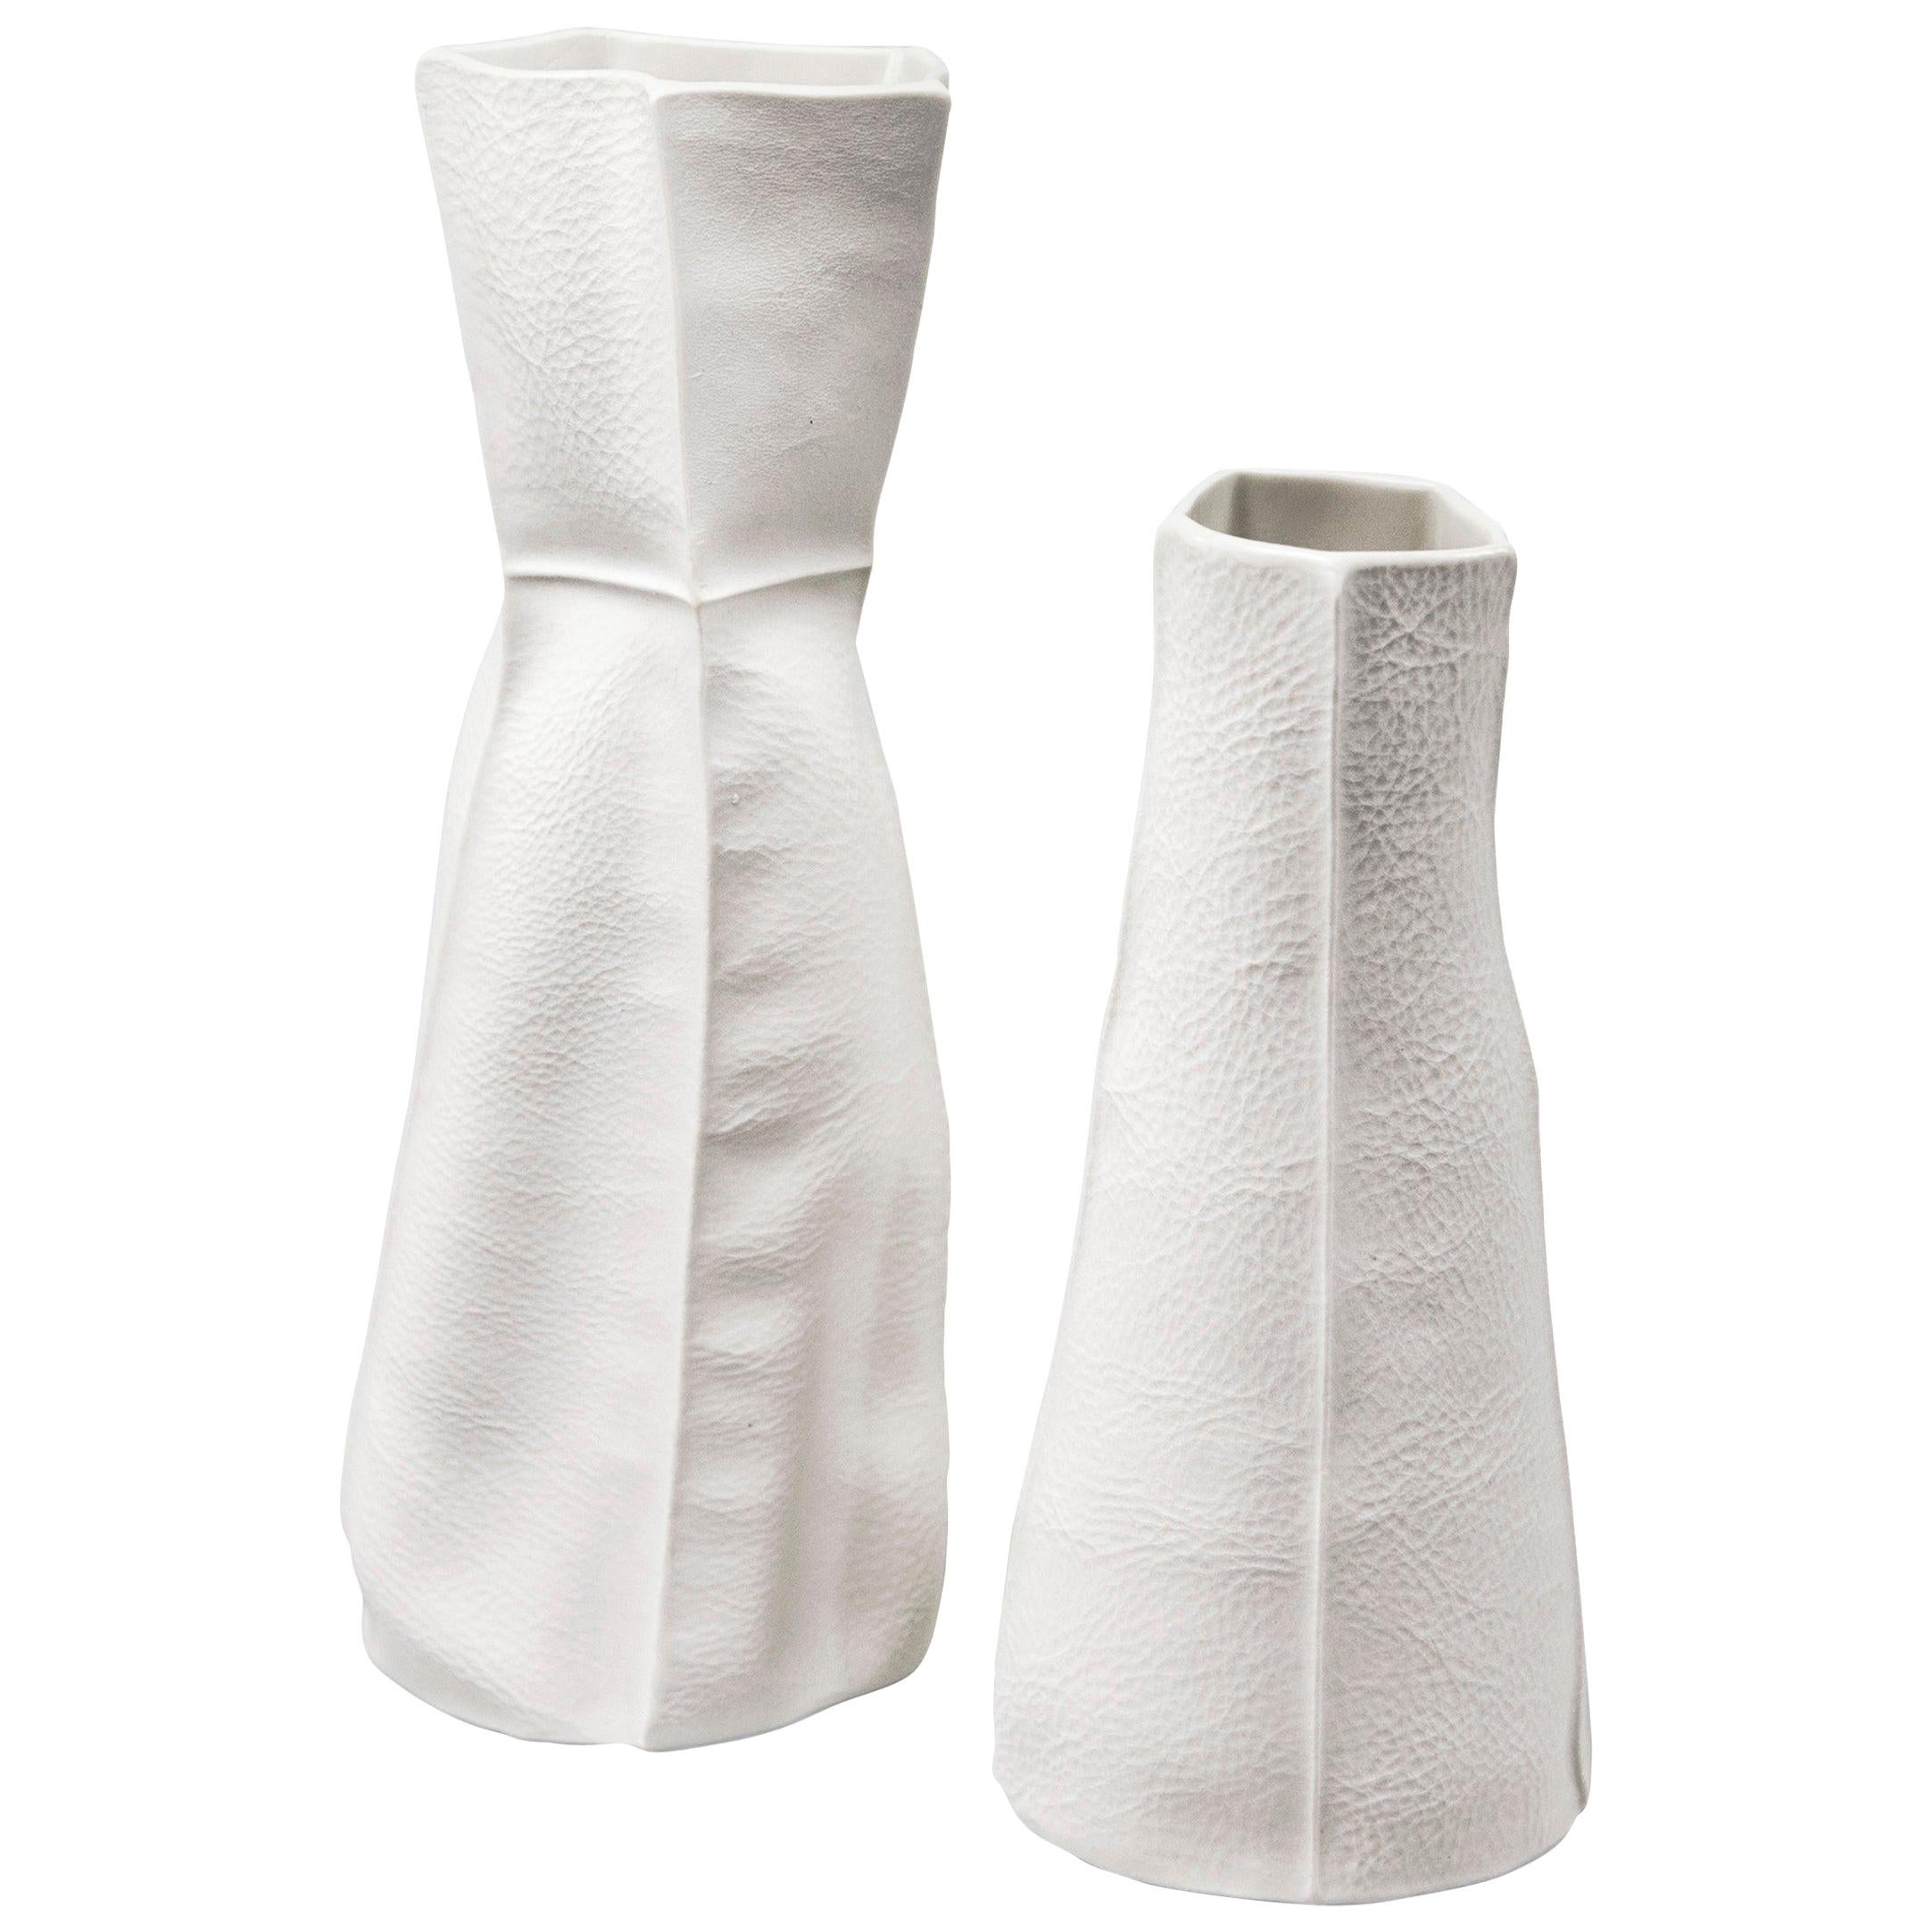 Pair of Kawa Vases by Luft Tanaka, in Stock